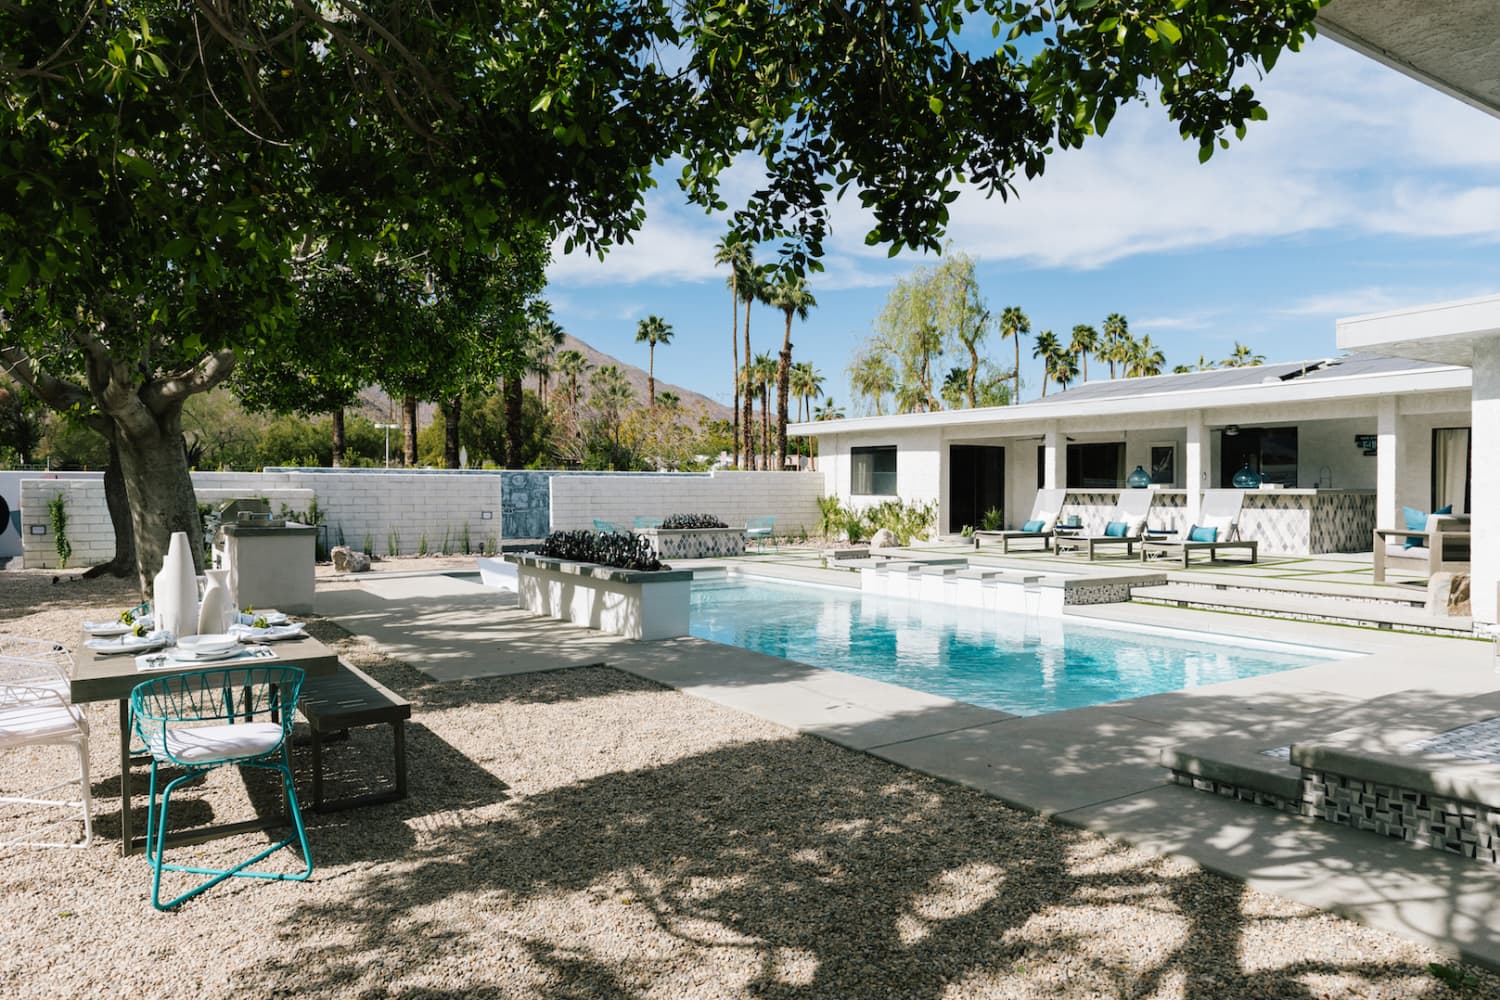 Palm Springs Vacation House By Home Decor Retailer, West Elm